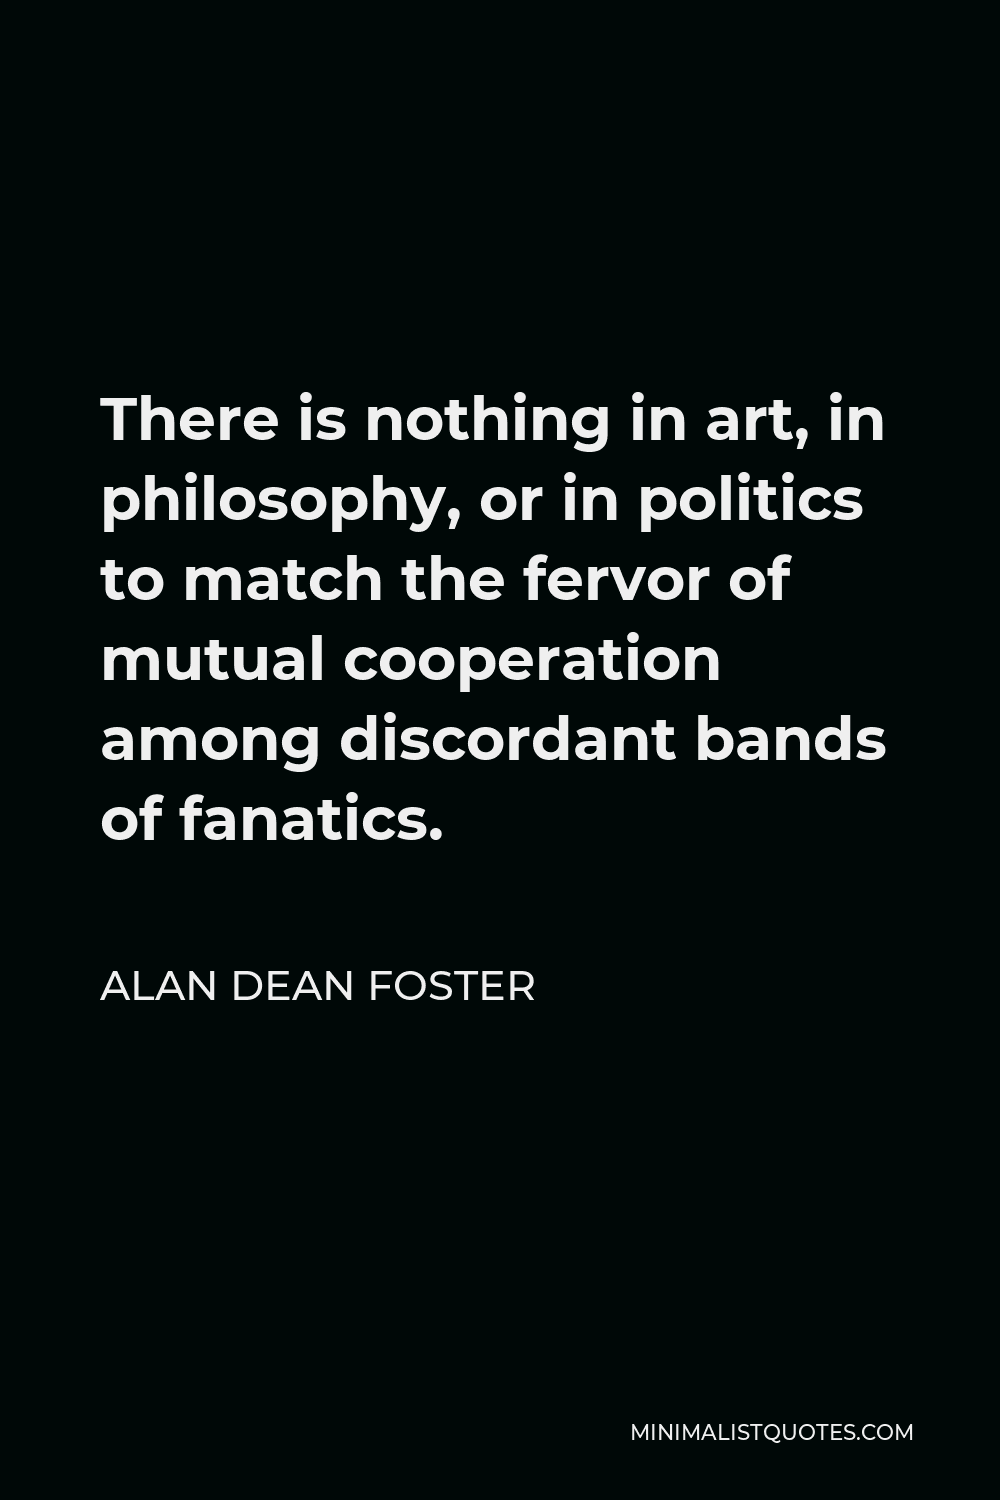 Alan Dean Foster Quote - There is nothing in art, in philosophy, or in politics to match the fervor of mutual cooperation among discordant bands of fanatics.